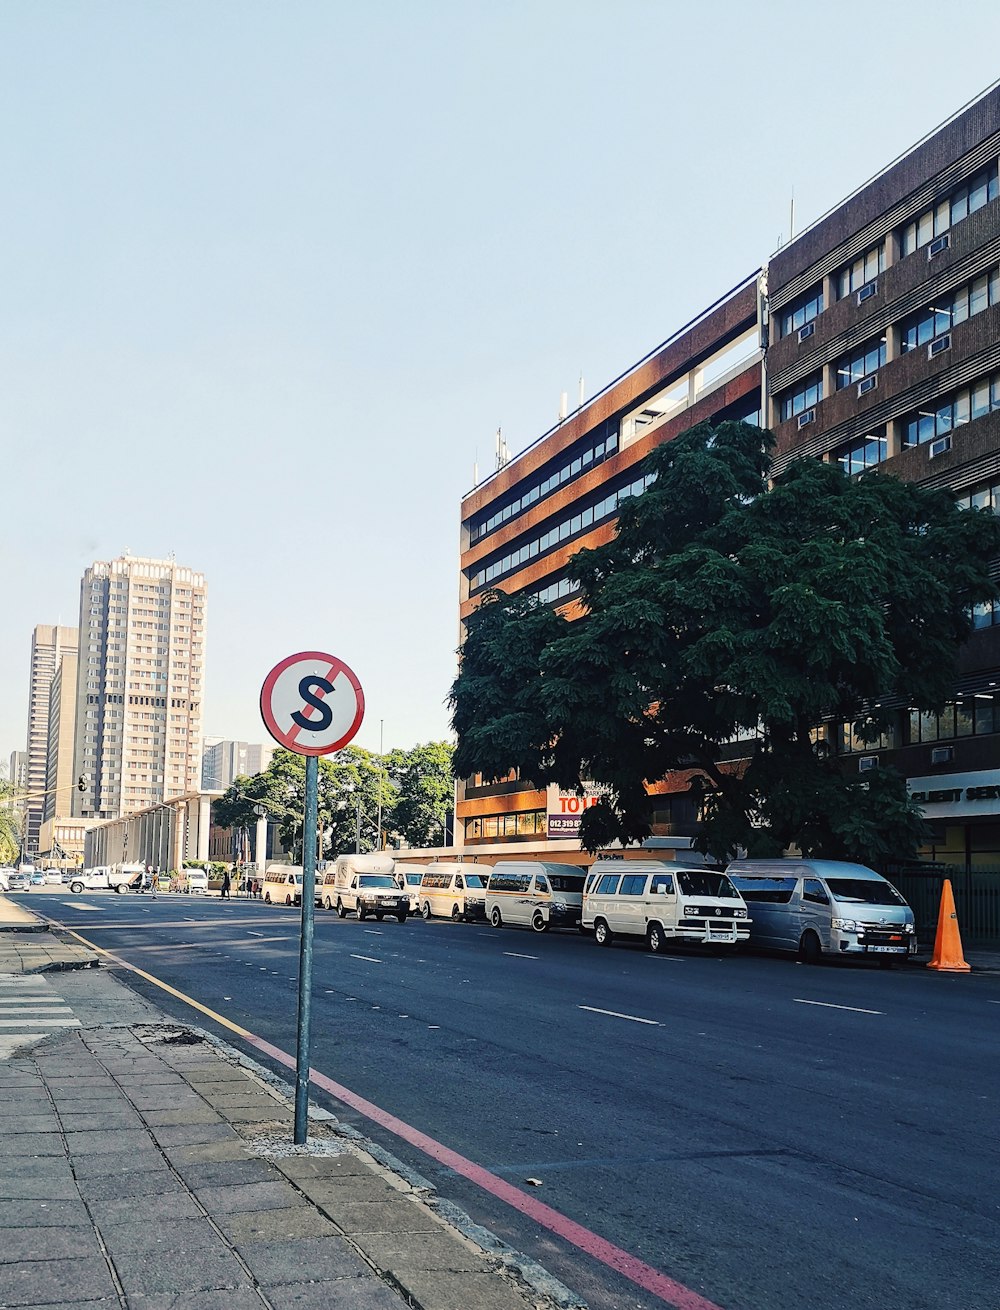 cars parked on side of the road near high rise buildings during daytime